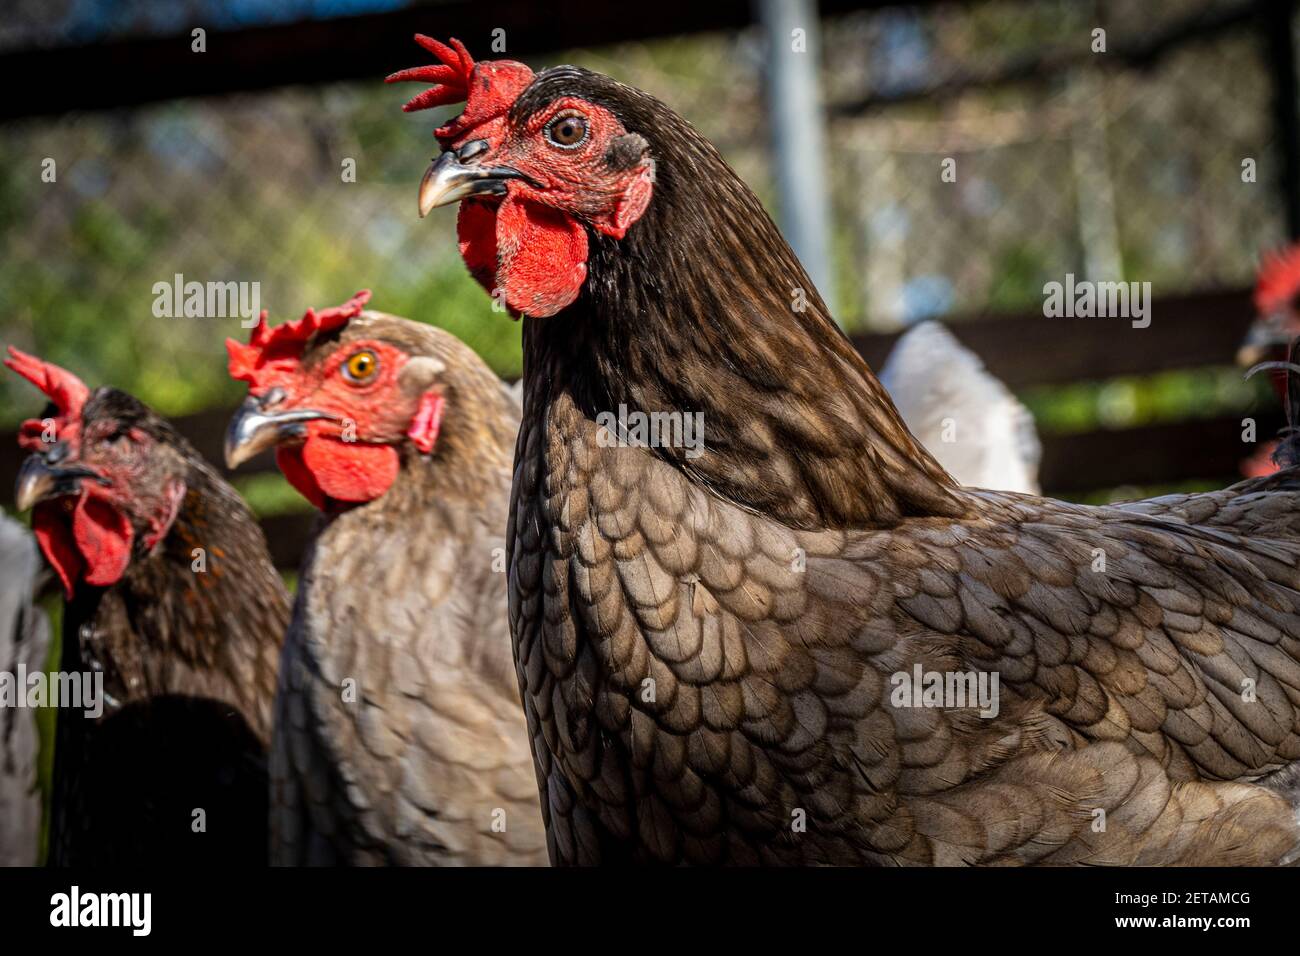 Blue Plymouth Rock chickens in their coop at Holman Harvest Farm, a free range and organic farm raising raises chickens, cattle, vegetables, and tropical fruit February 25, 2021 in Loxahatchee Groves, Florida. Stock Photo